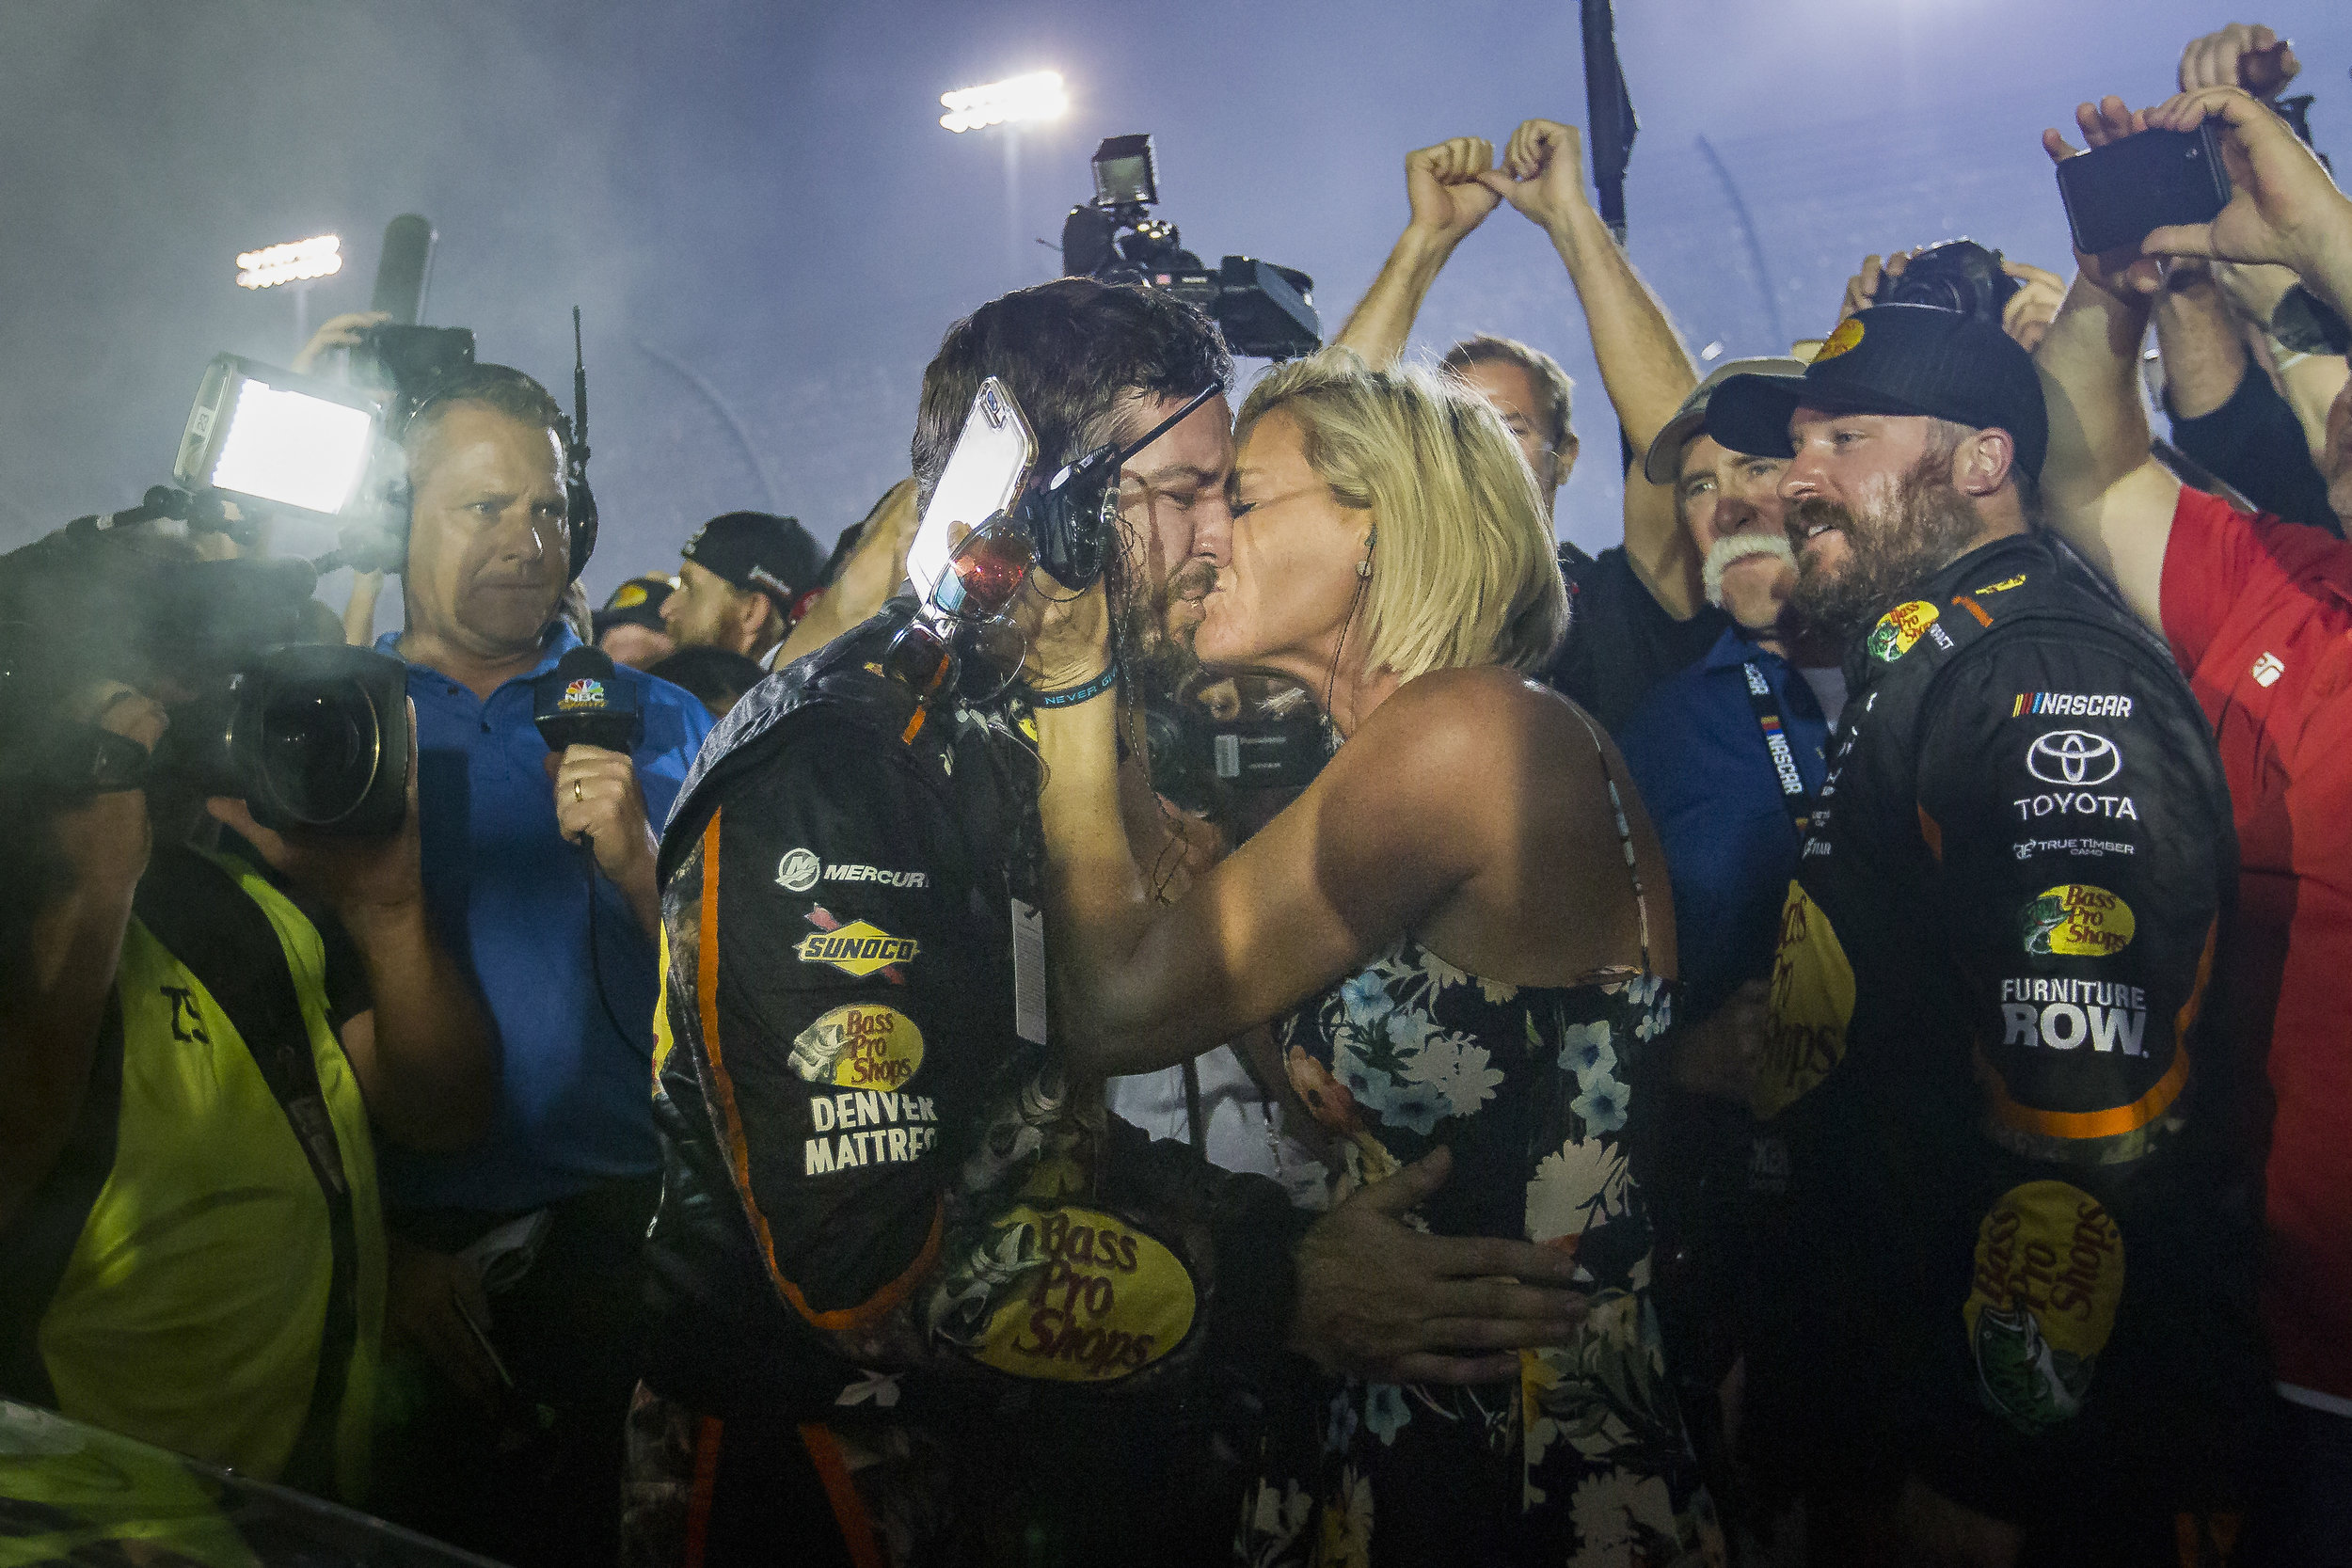  Martin Truex Jr. #78 kisses his wife after winning the Monster Energy NASCAR Cup Series and the Ford EcoBoost 400 Championships at the Homestead-Miami Speedway on Sunday, Nov. 19, 2017. 